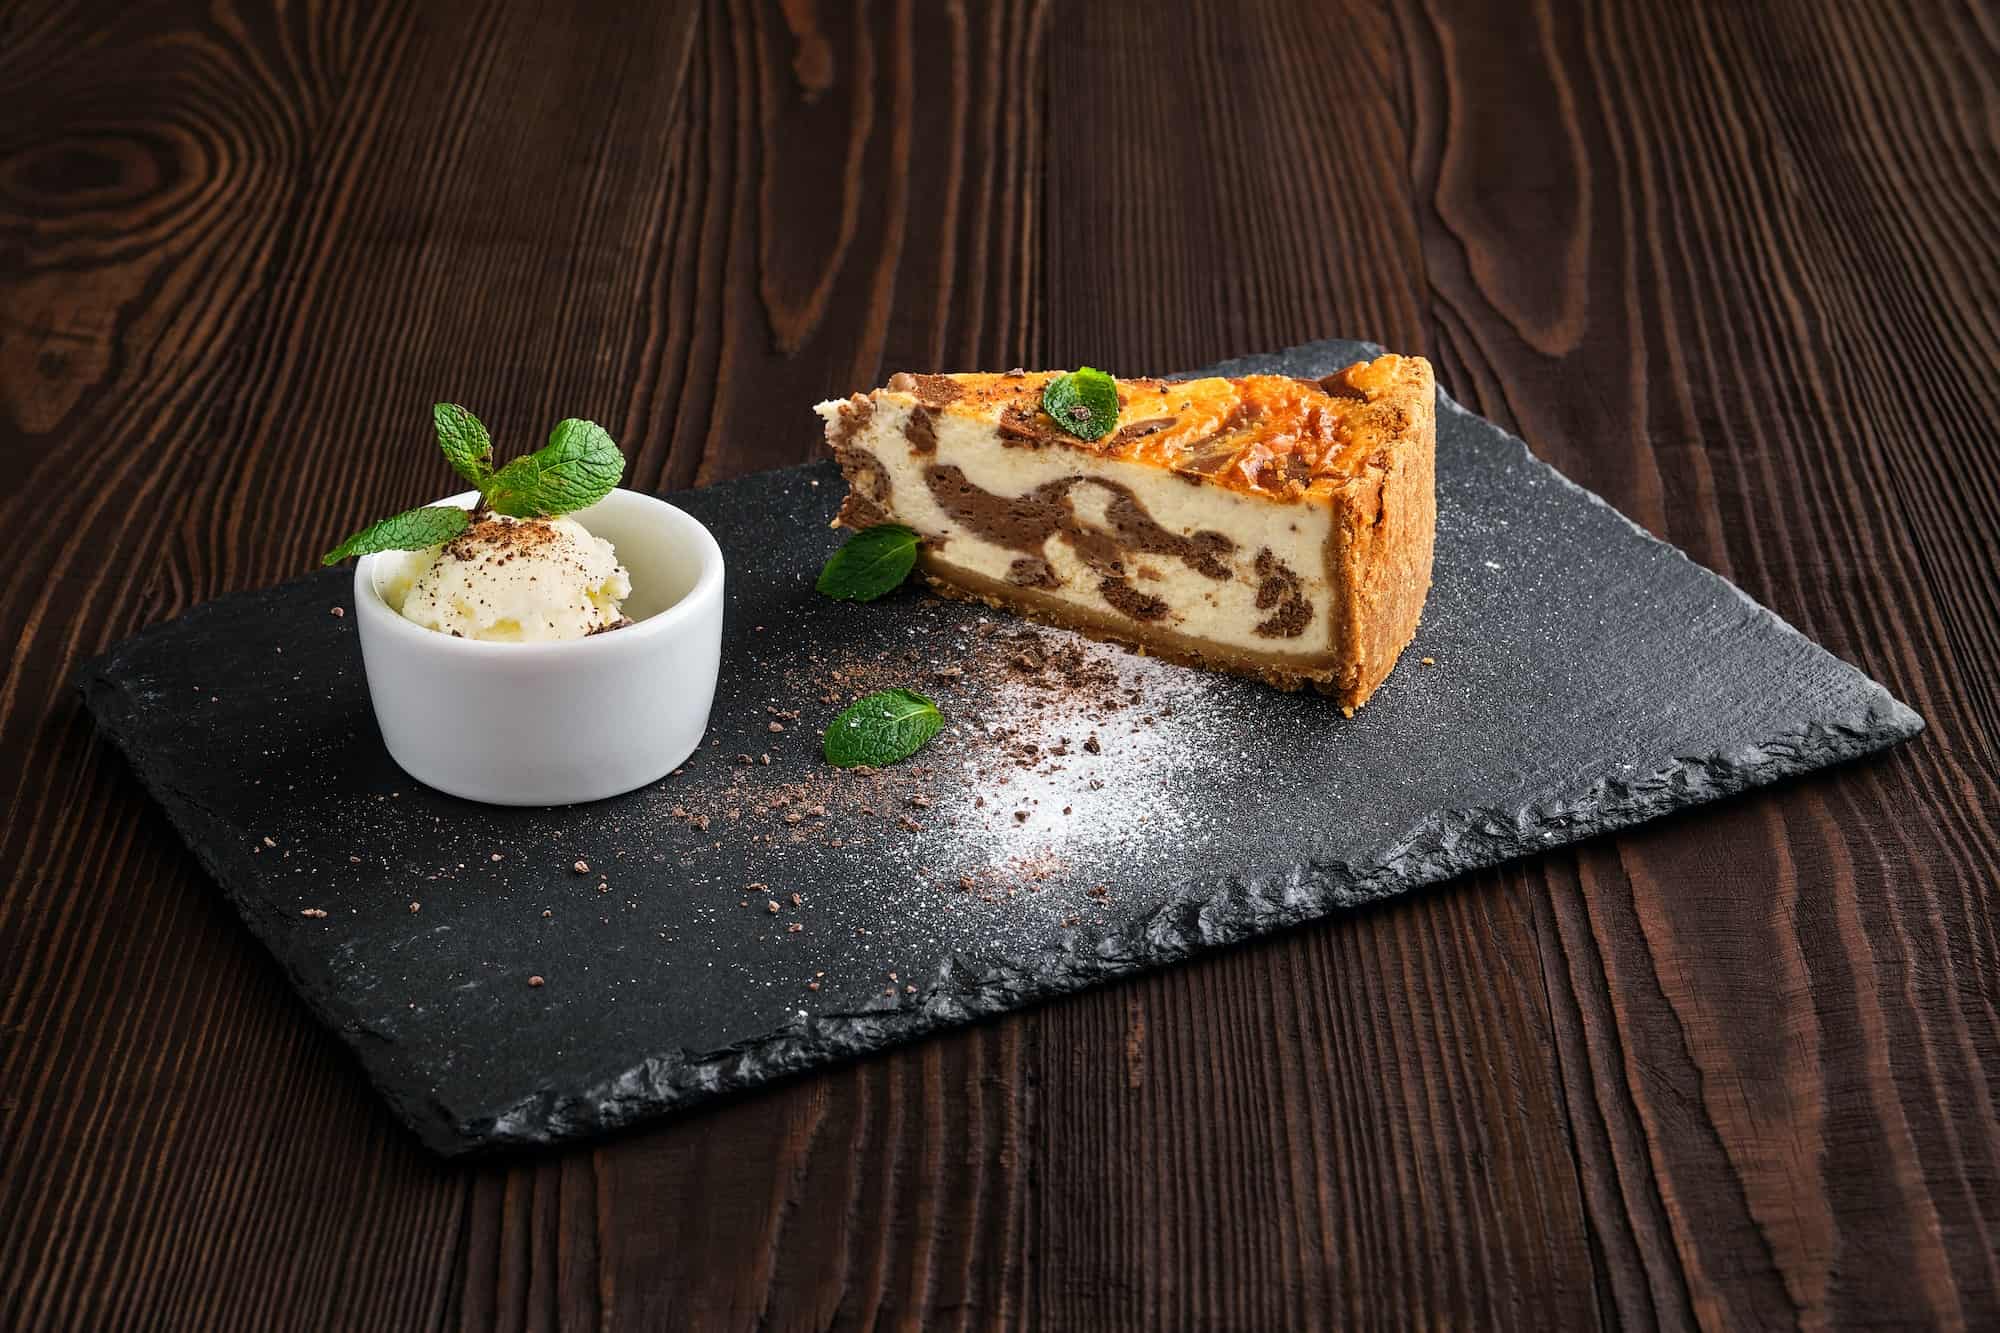 Layered cheesecake with ice cream served on slate plate